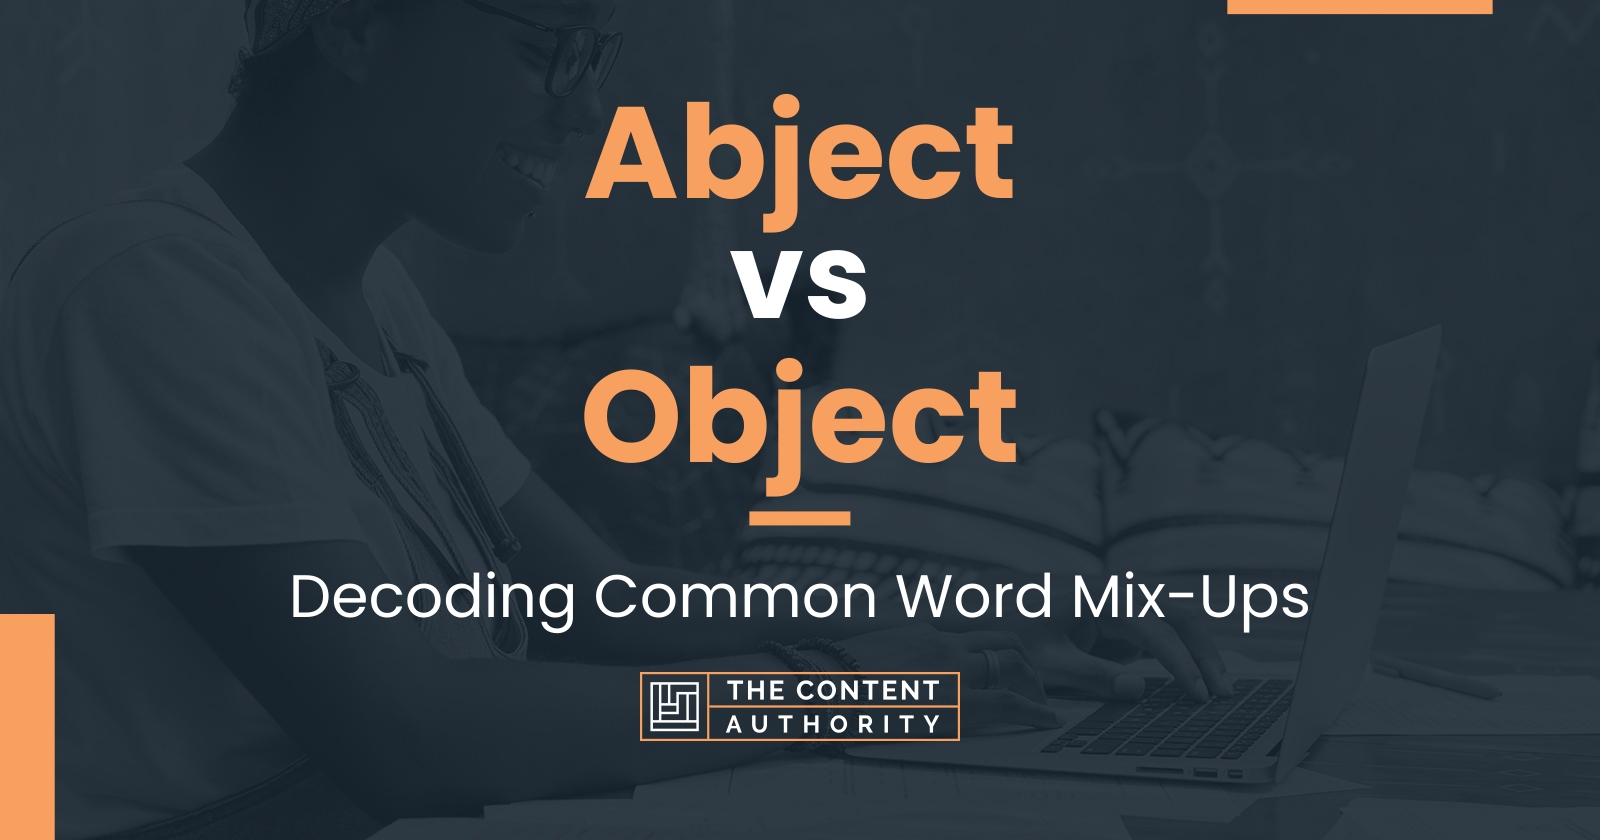 Abject vs Object: Decoding Common Word Mix-Ups